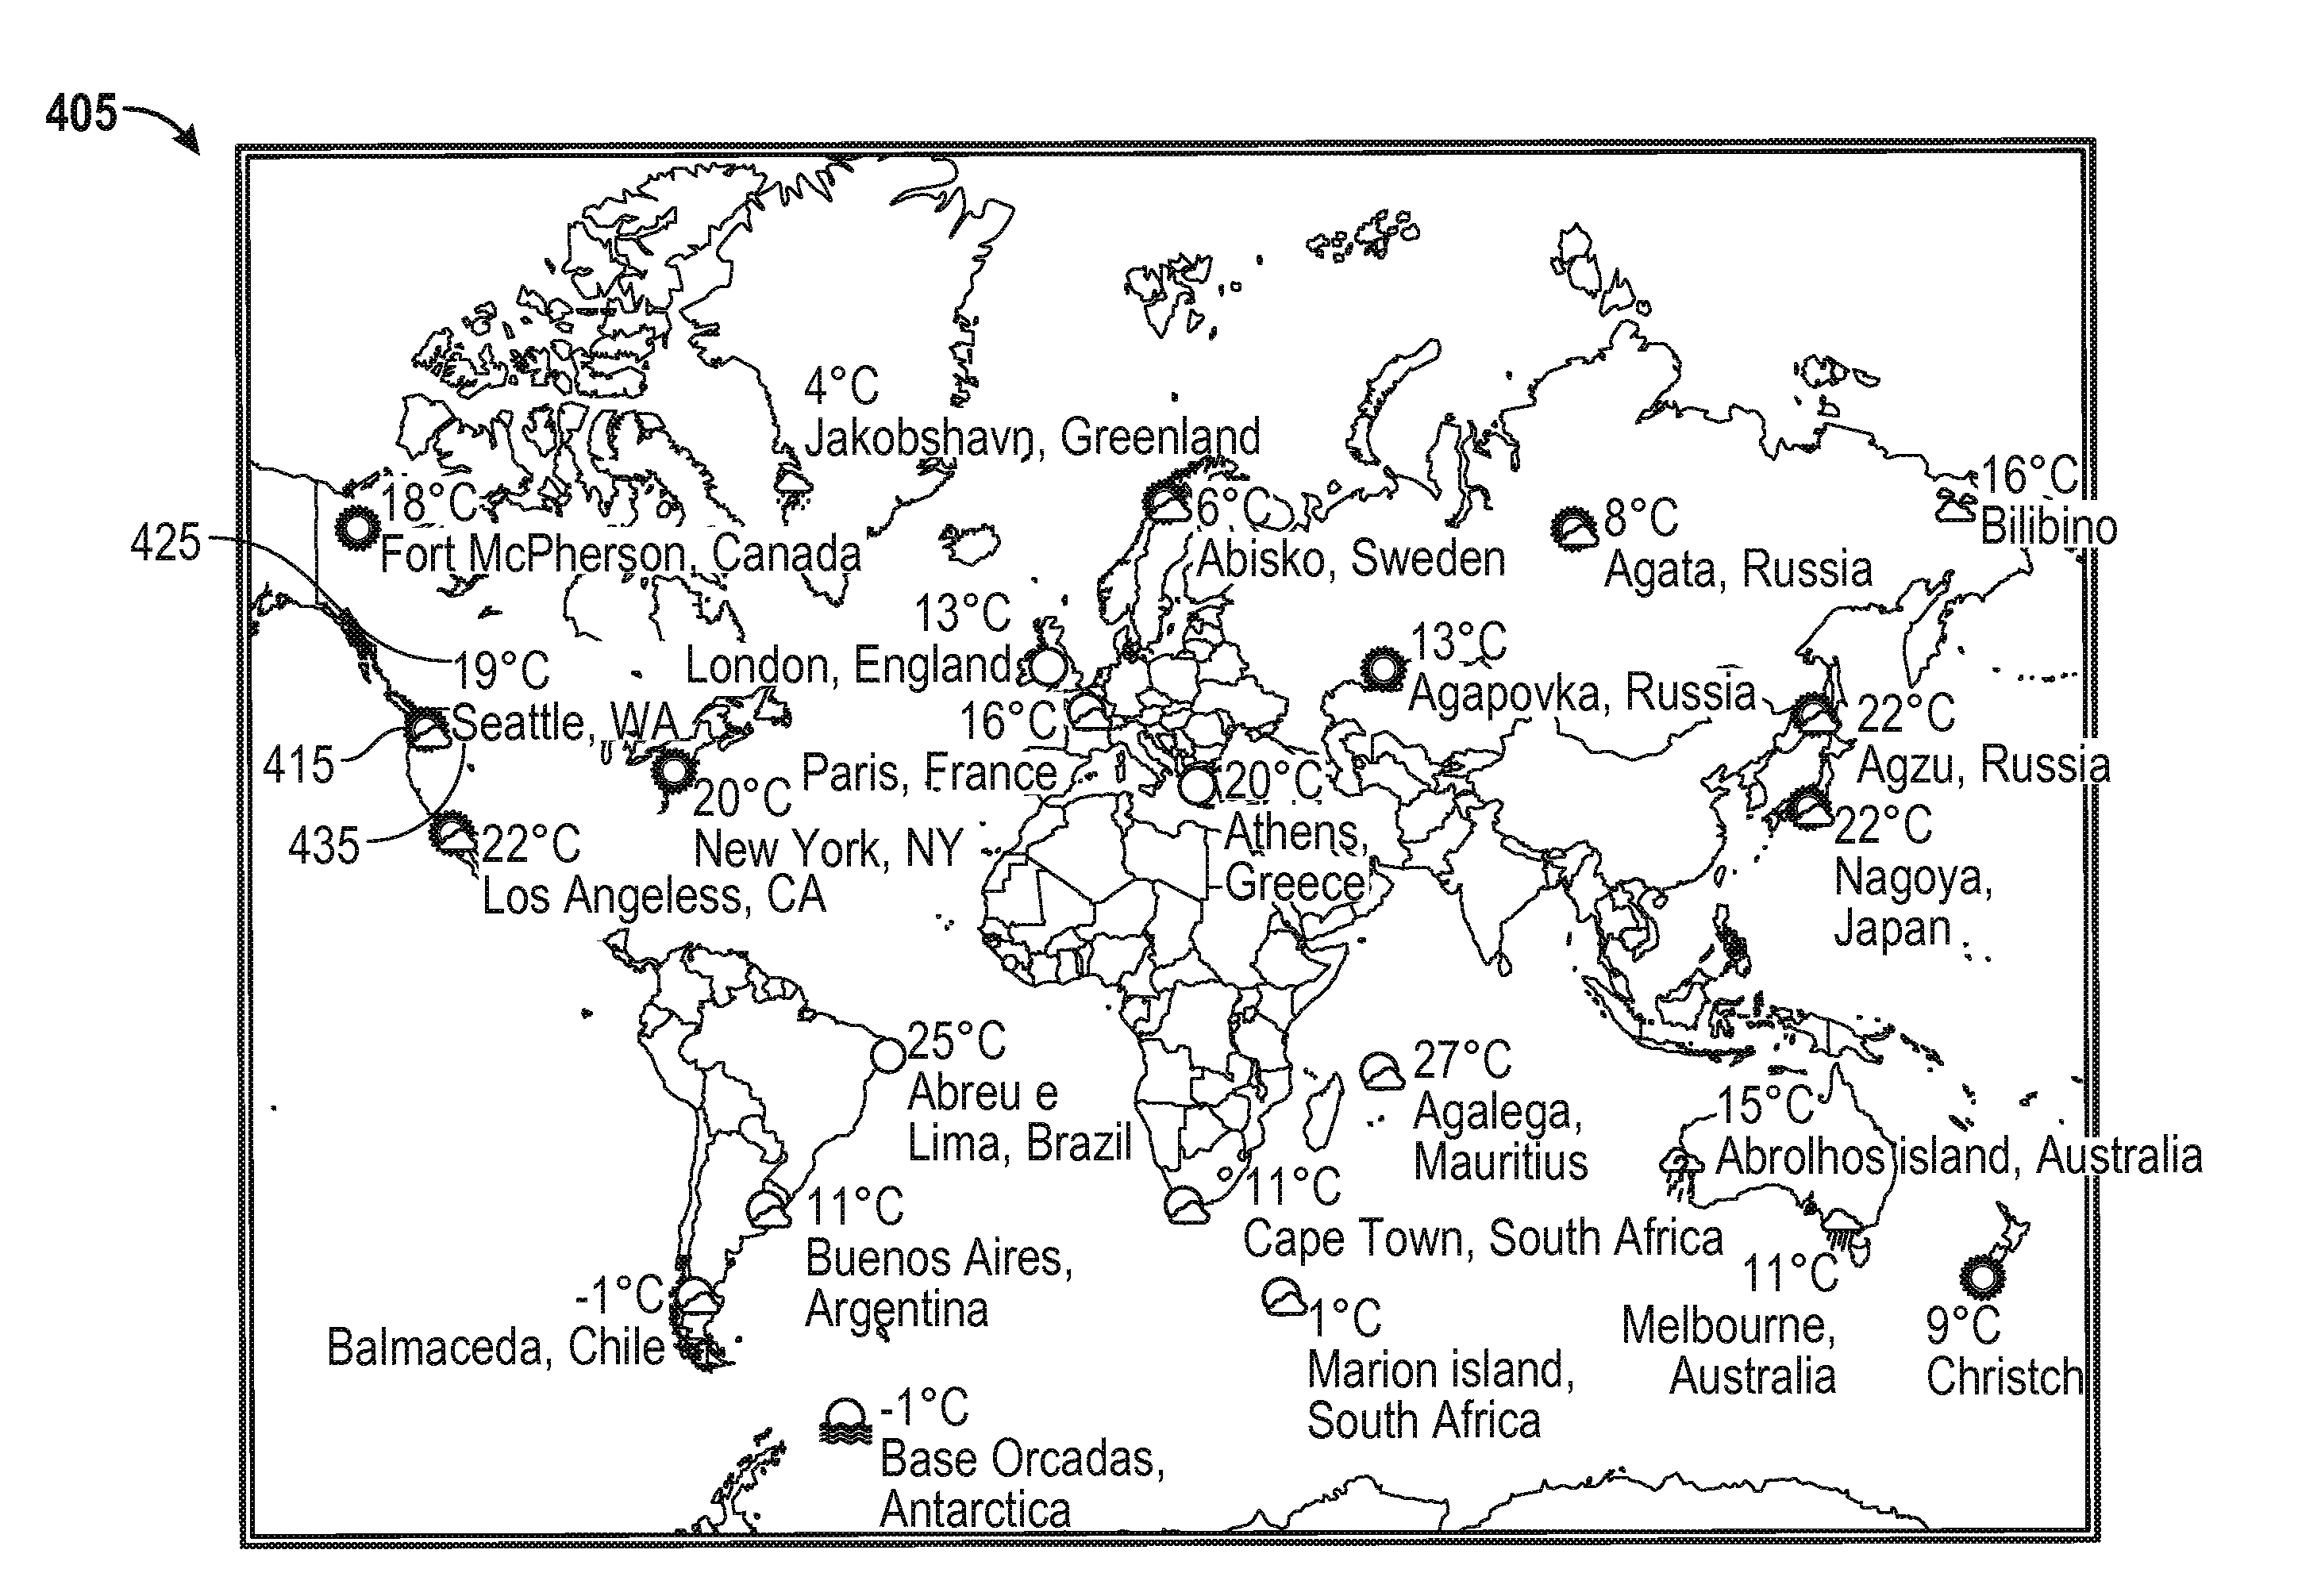 Custom labeling of a map based on content